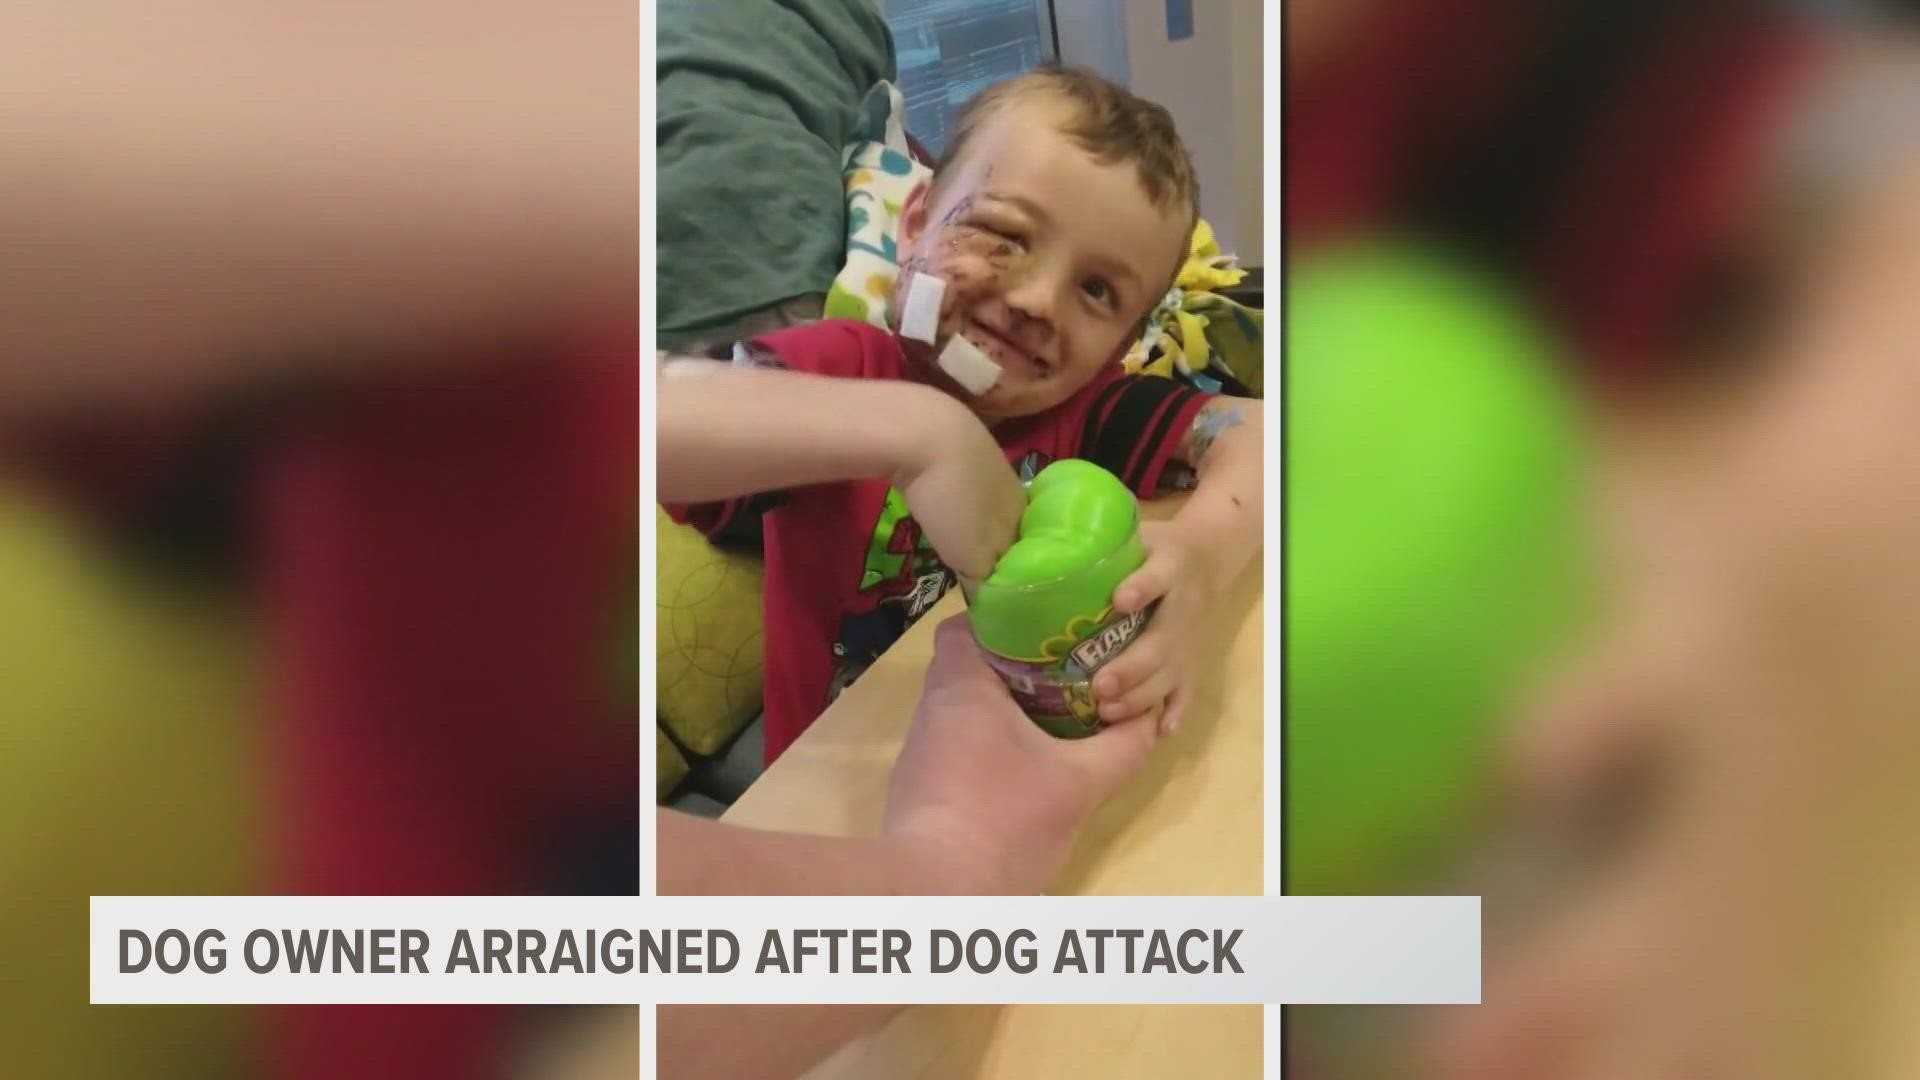 A Montcalm County man is facing felony charges after police say his two dogs attacked and severely injured a five-year-old boy.